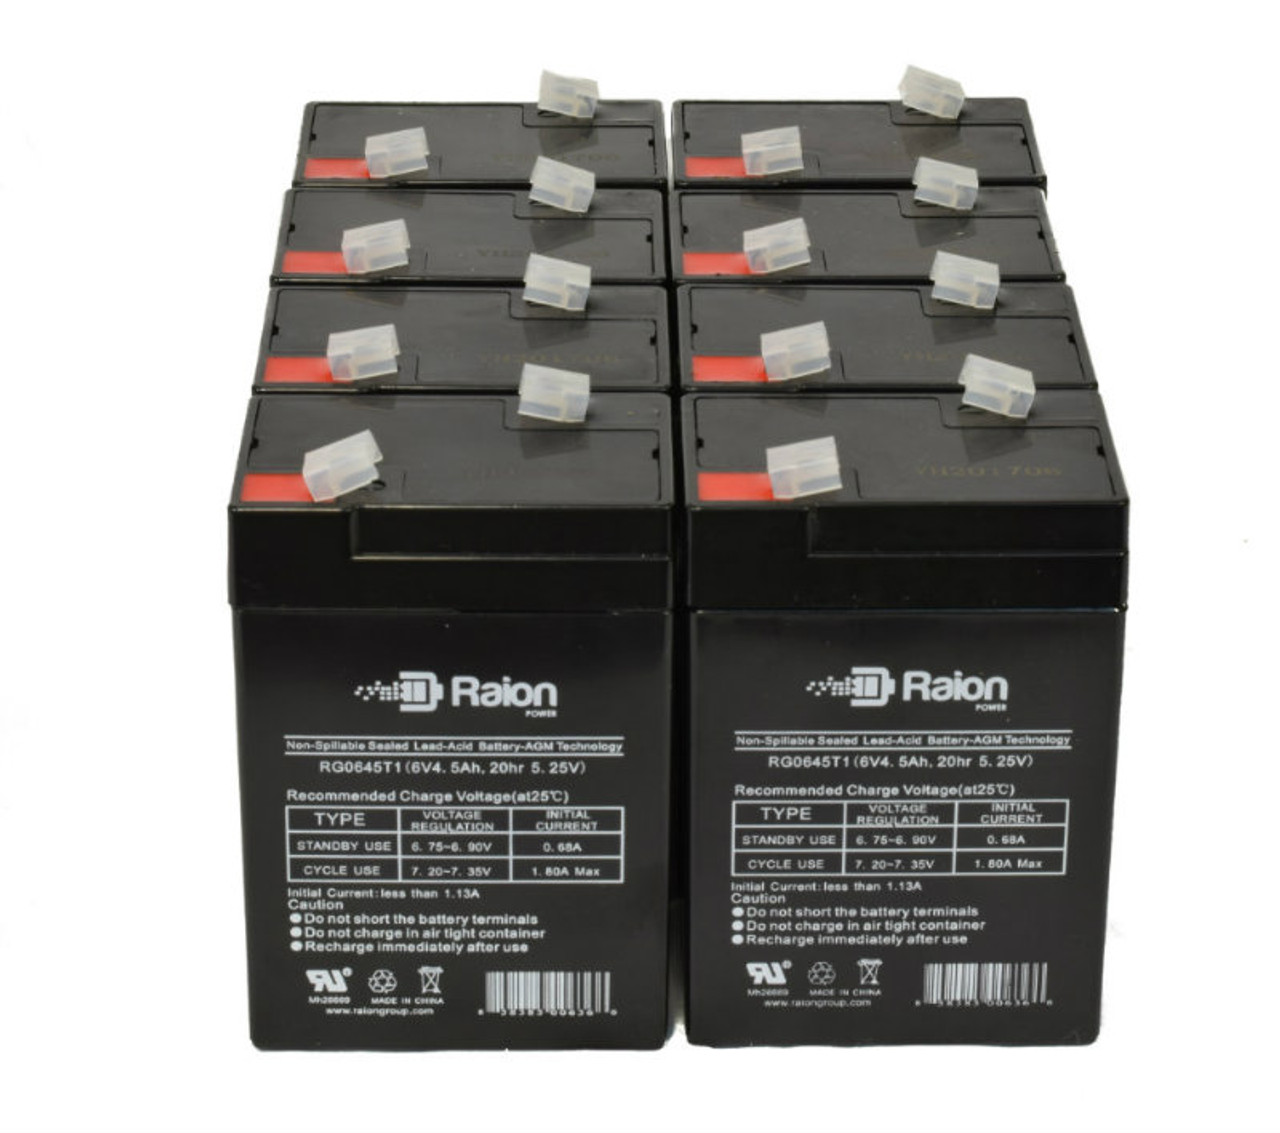 Raion Power 6V 4.5Ah Replacement Emergency Light Battery for Dual-Lite ICL1 - 8 Pack